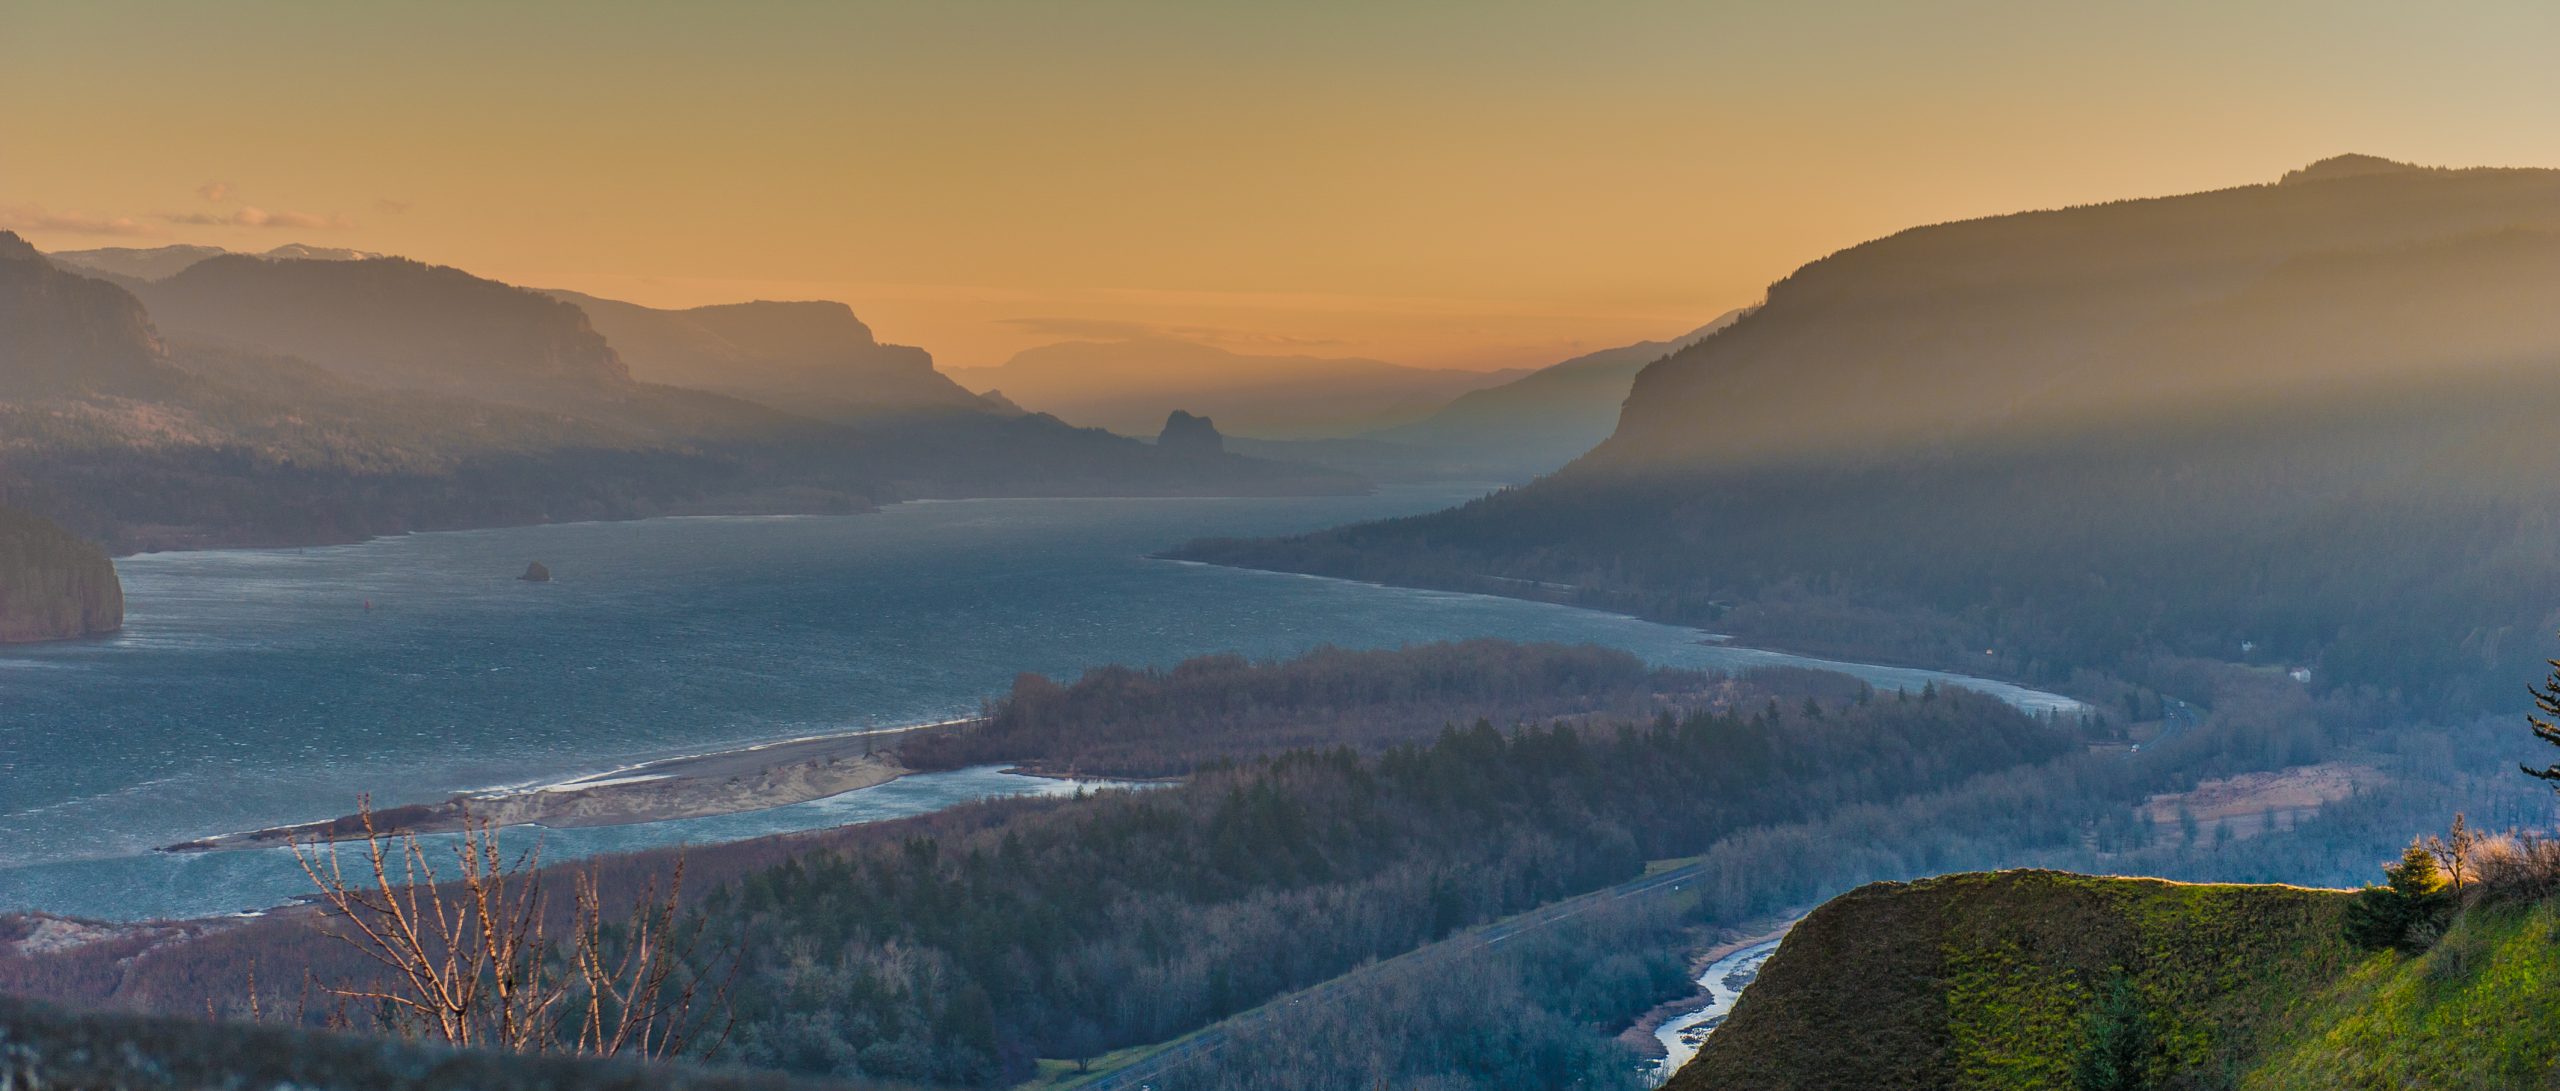 Columbia River viewed from Vista House, Oregon, 2013.  Photo credit  A. W.(Tony) Grover.